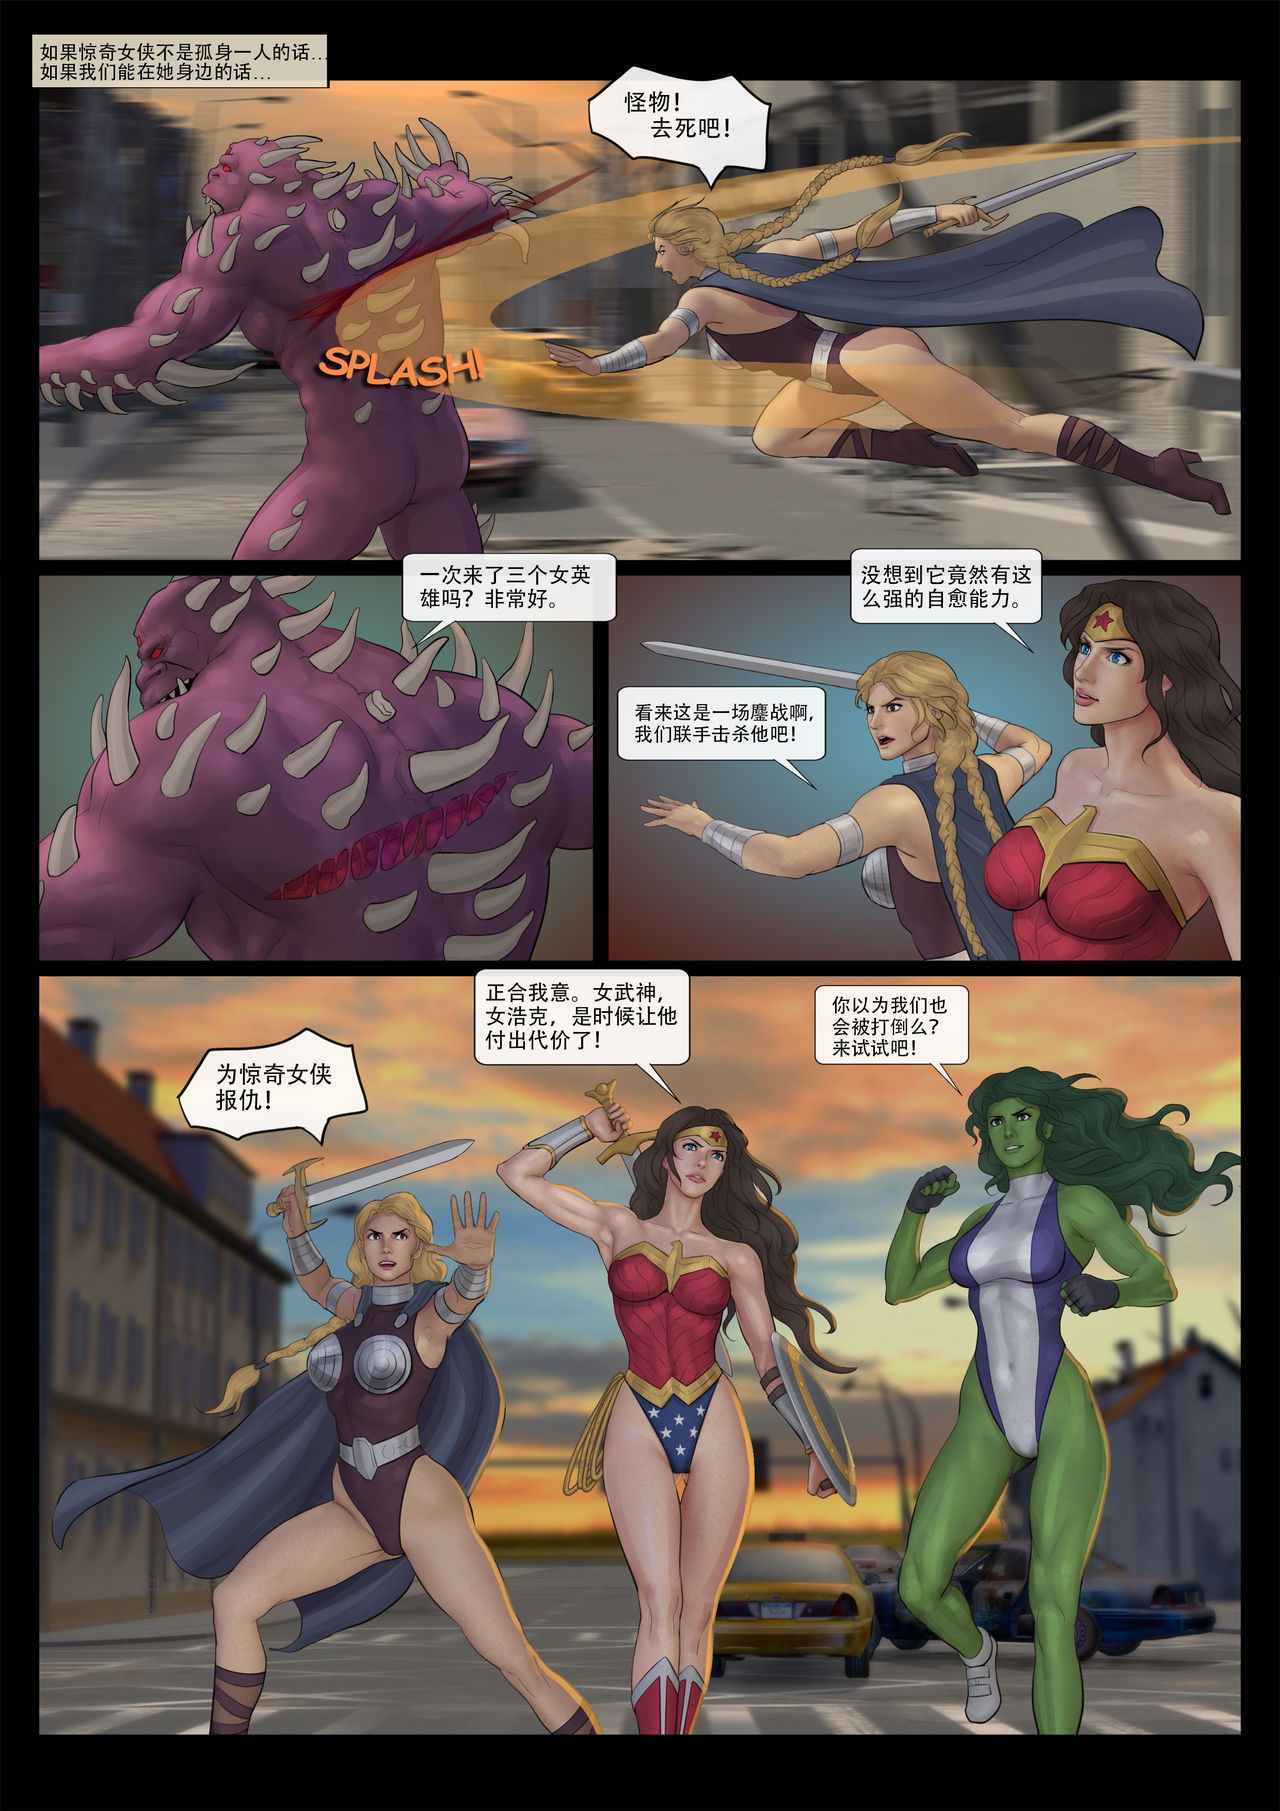 [Feather] - Avengers nightmare 01- 04 page 5 full